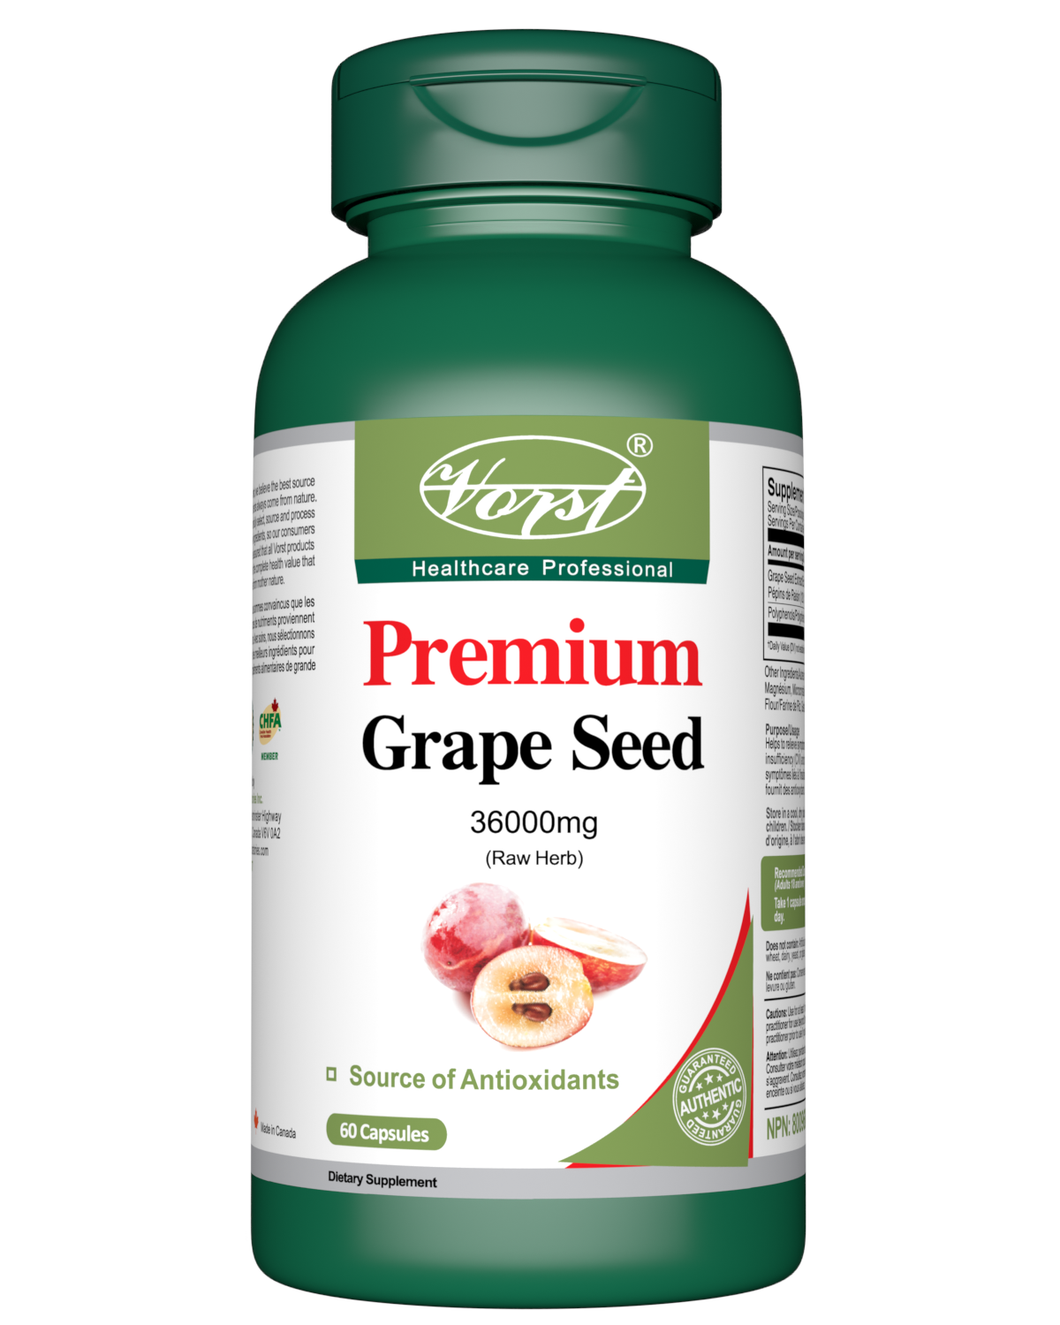 Premium Grape Seed Extract 36000mg Raw Equivalent Per Serving 60 Capsules